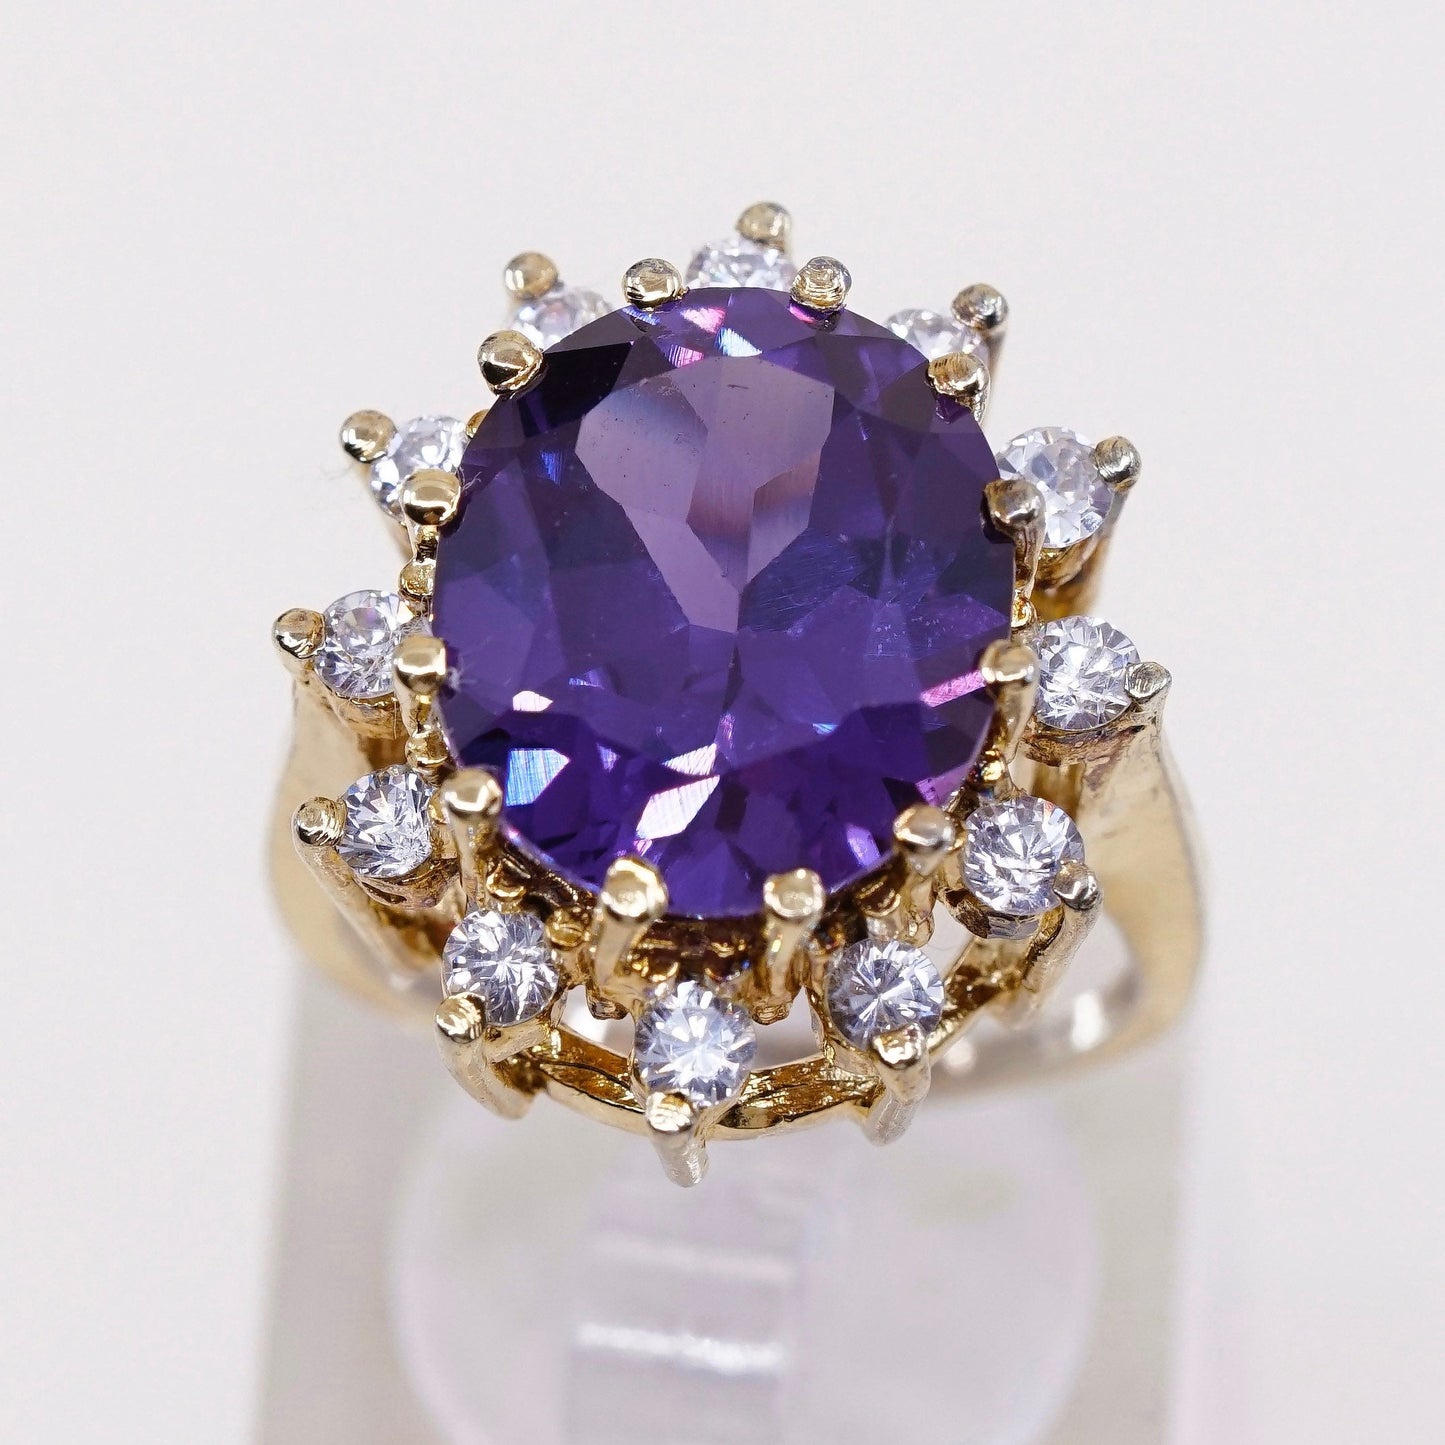 sz 7, Vermeil gold over sterling silver 925 cocktail ring with amethyst and Cz